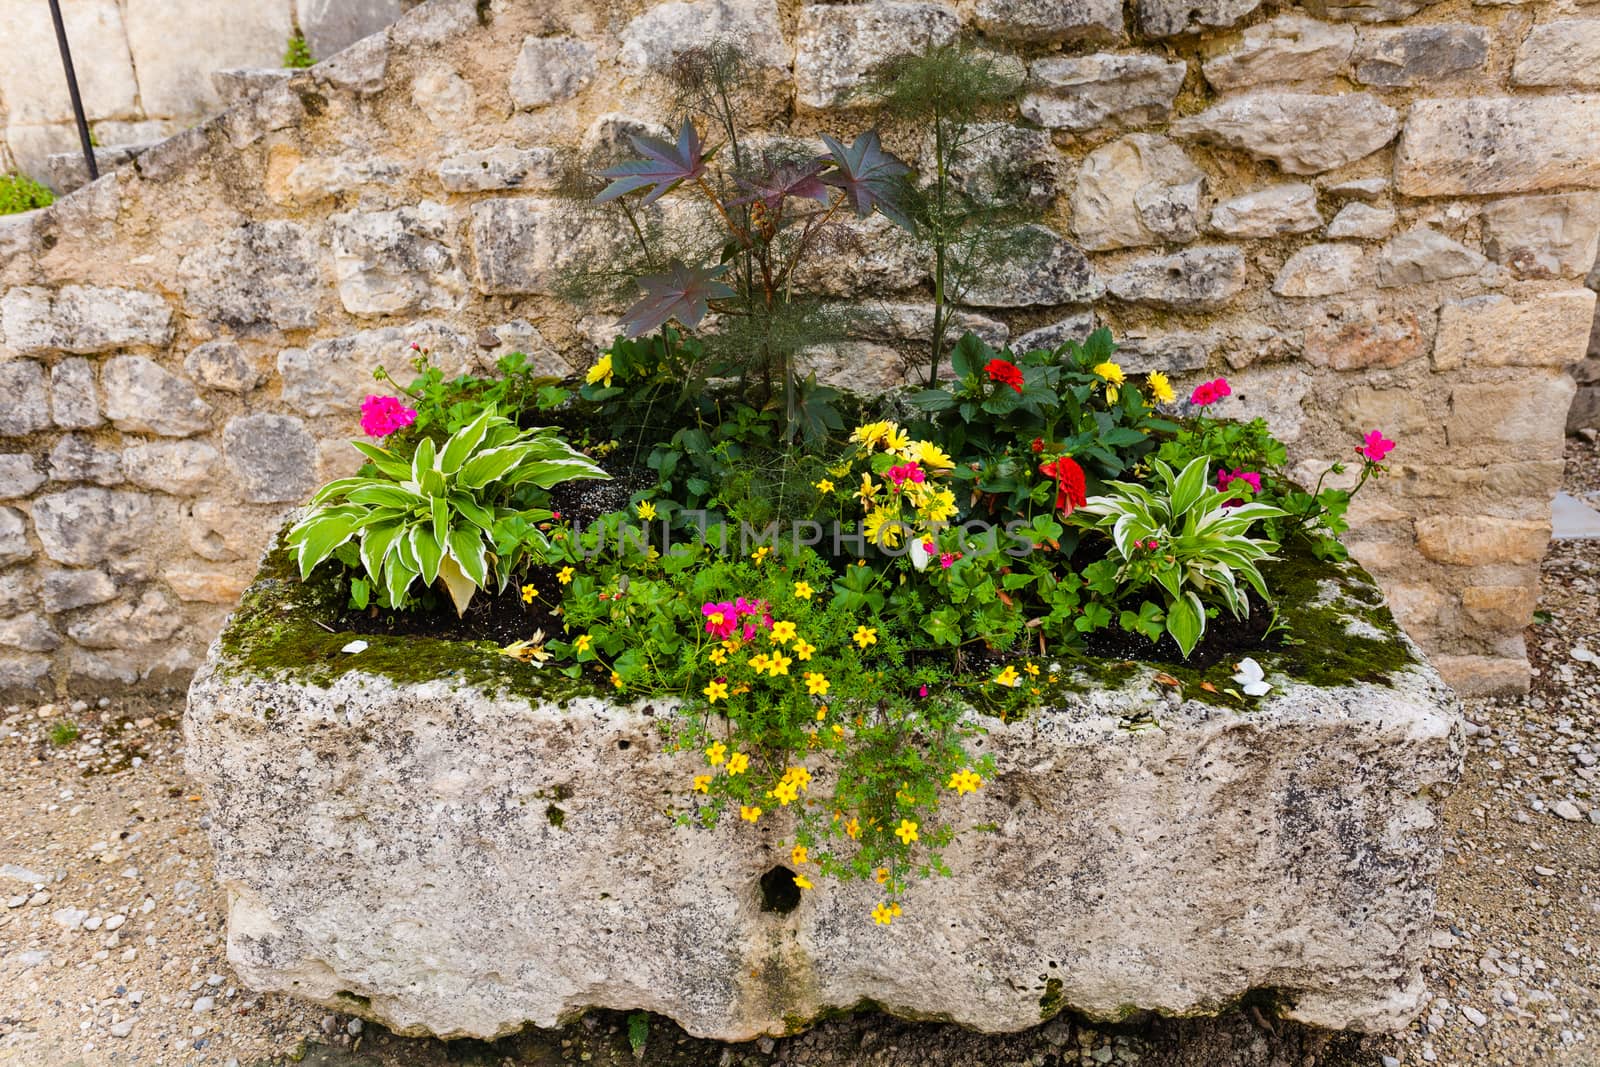 Beautifully composed flower box with colorful plants in Perigueux bolonging to the french region of Dordogne